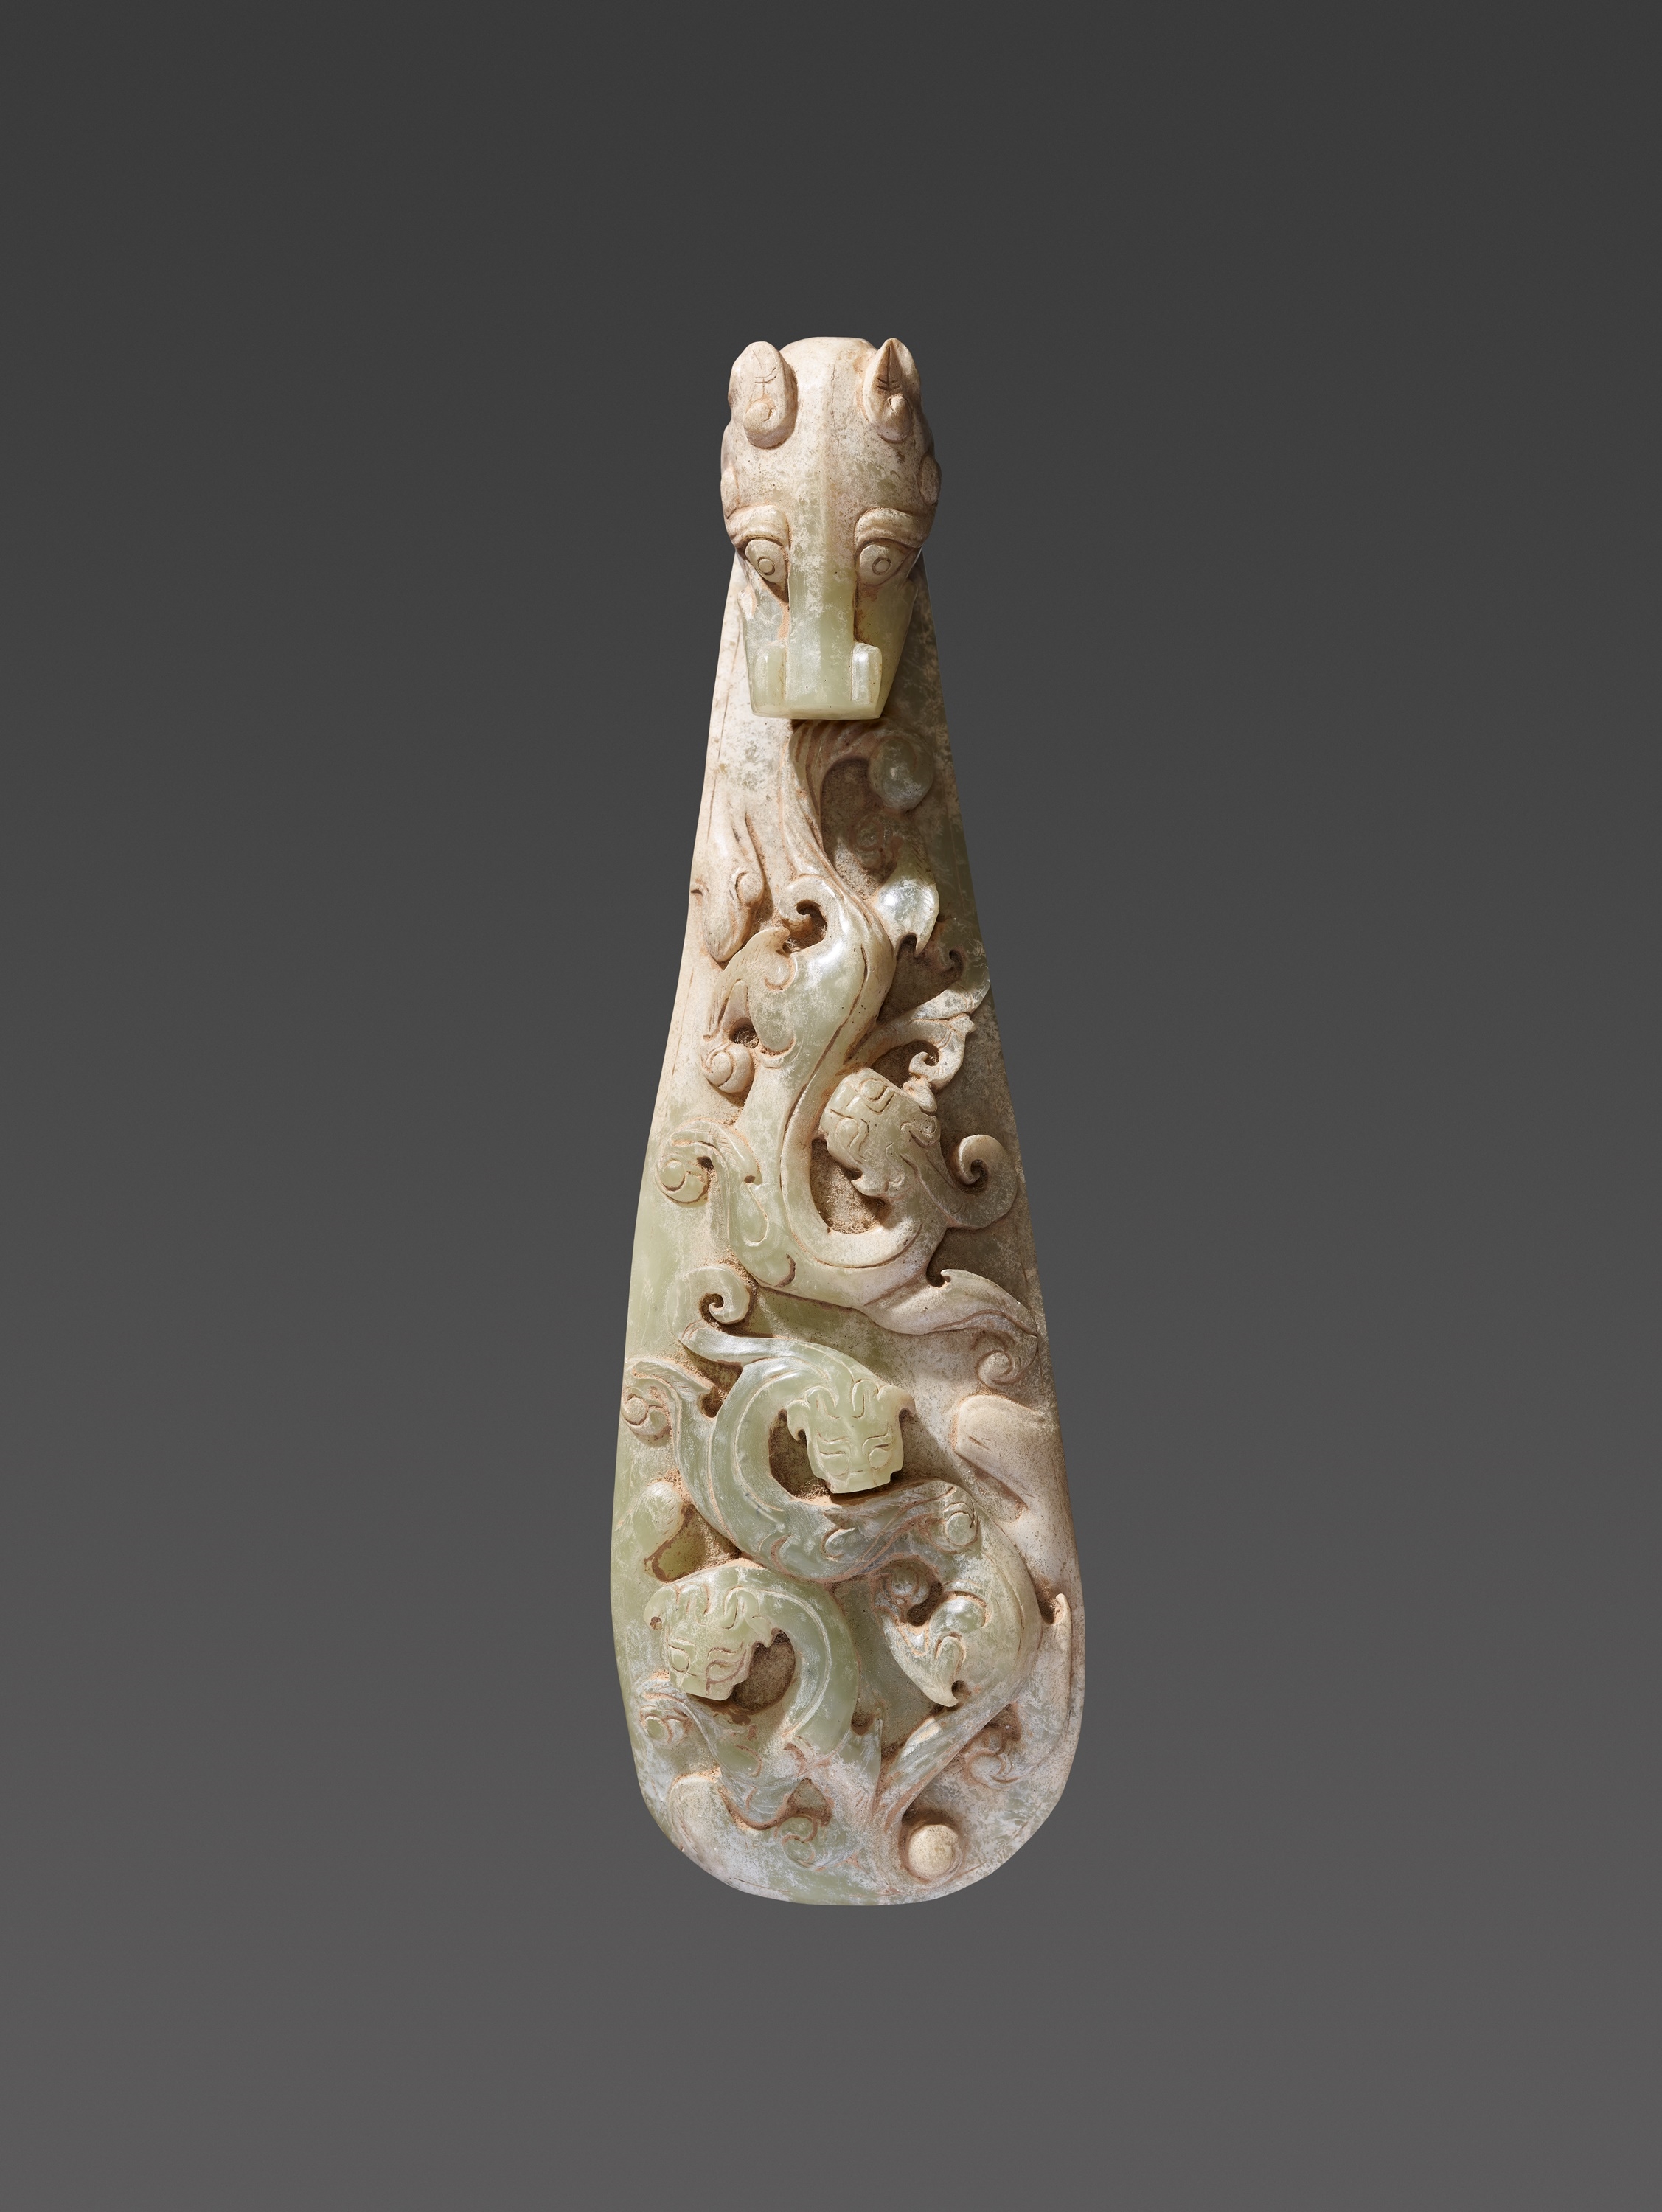 A LARGE ARCHAISTIC CELADON JADE ‘CHILONG’ BELT HOOK by Han Dynasty, 20th century